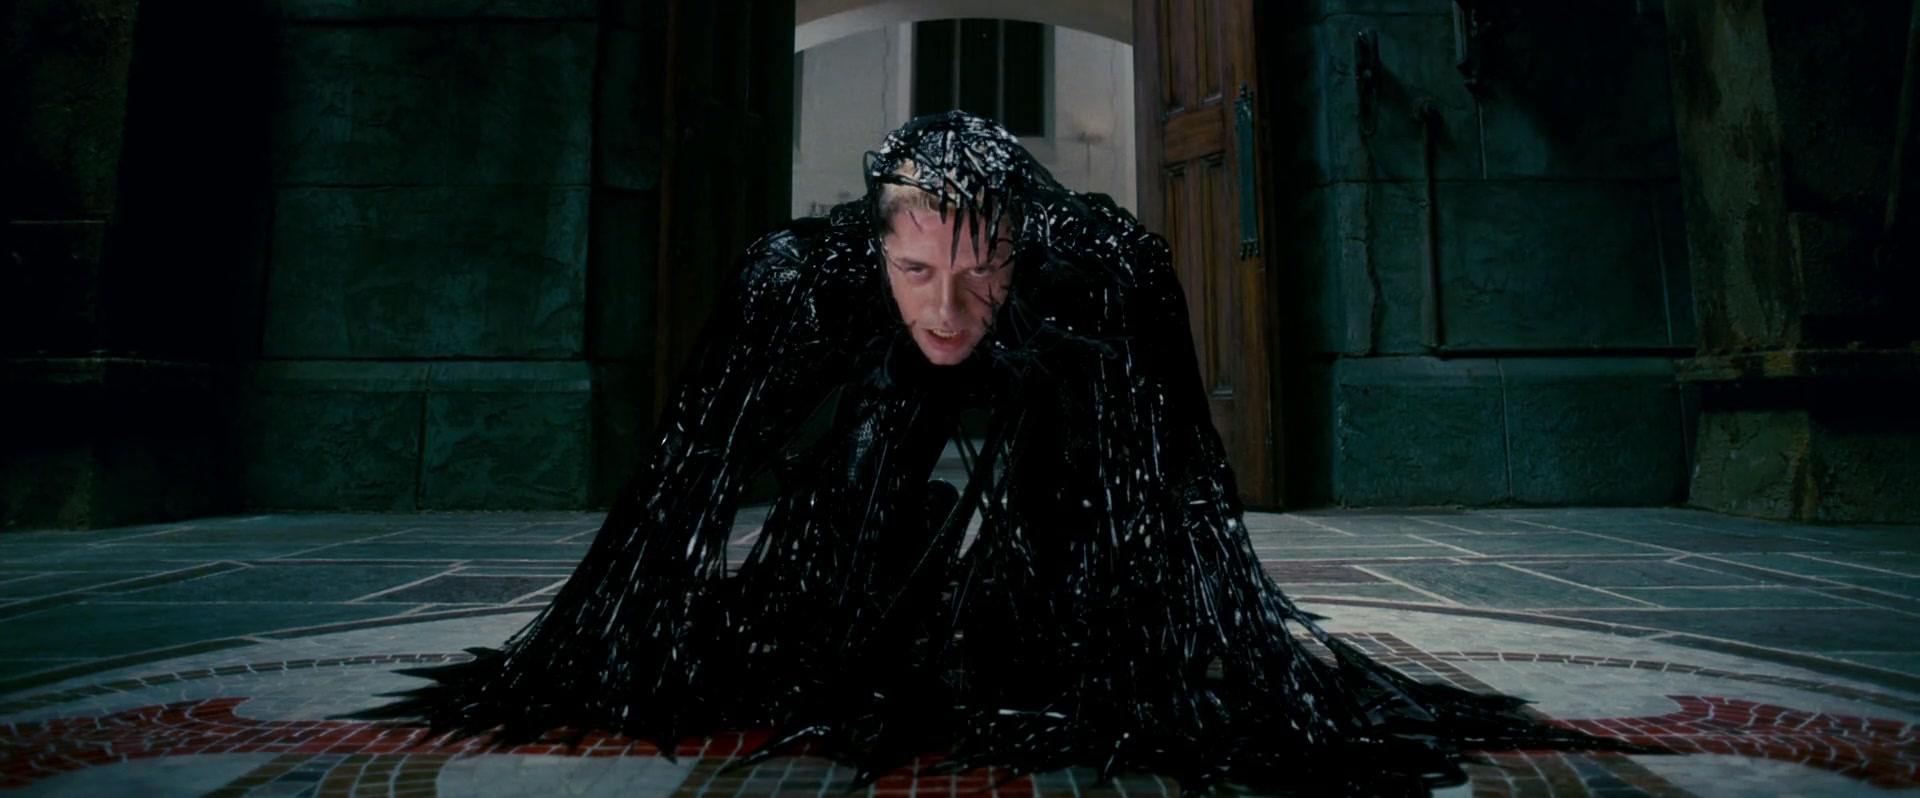 Eddie Brock (Topher Grace) finds his life drastically changed in Spider-Man 3 (2007), Sony Pictures